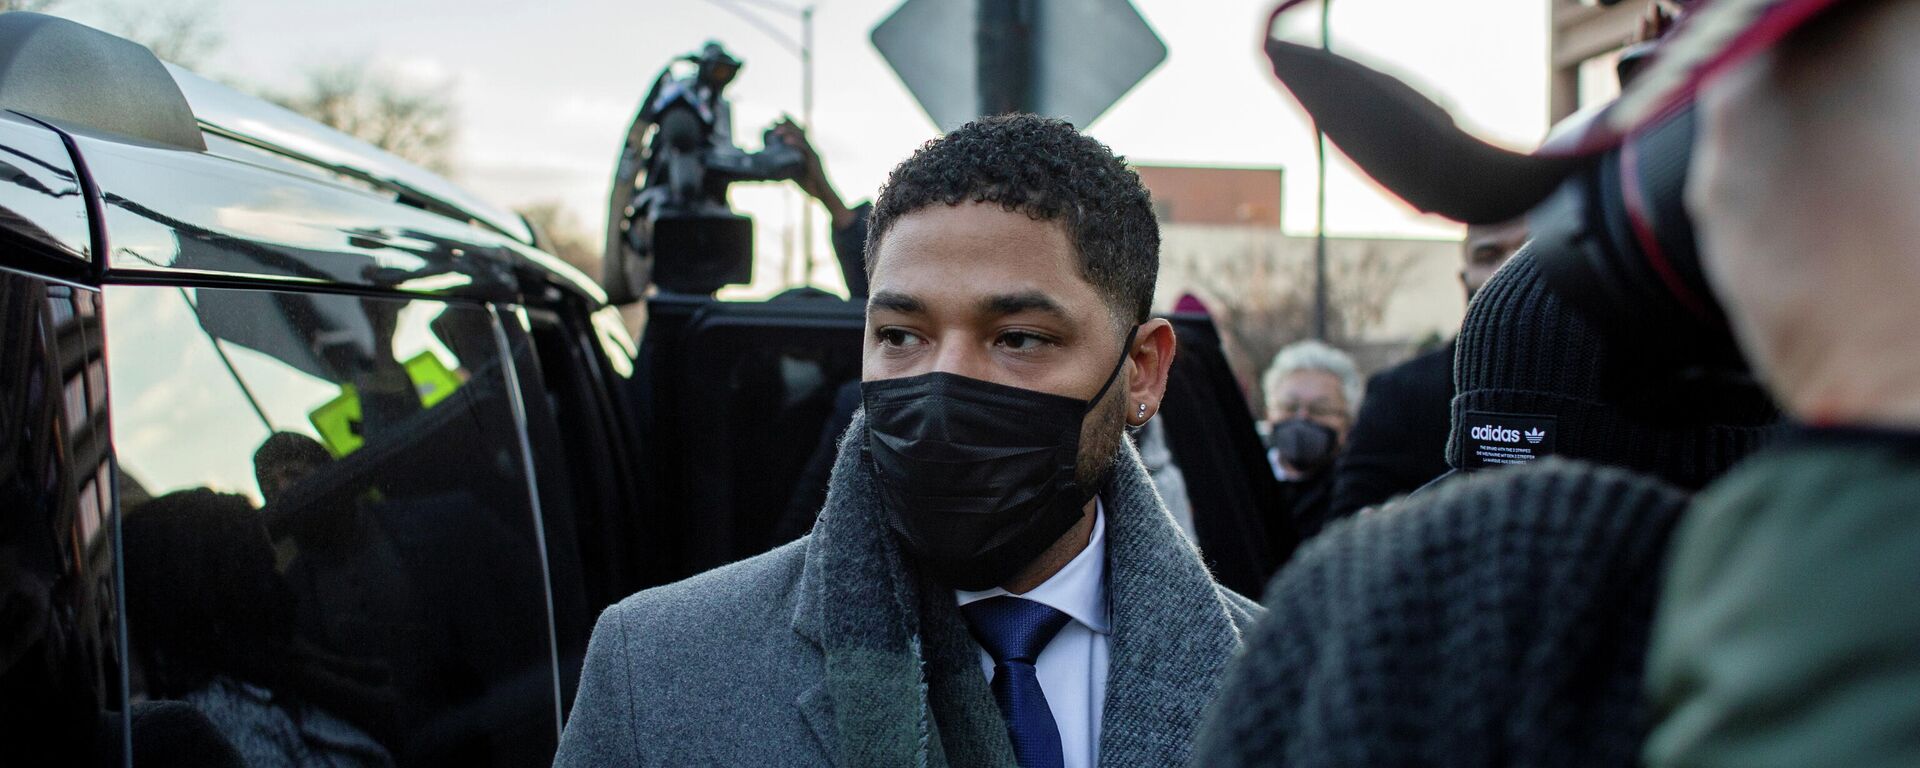 Former Empire actor Jussie Smollett leaves court during his trial for six counts of disorderly conduct on suspicion of making false reports to police, in Chicago, Illinois, U.S. December 8, 2021. - Sputnik International, 1920, 09.12.2021